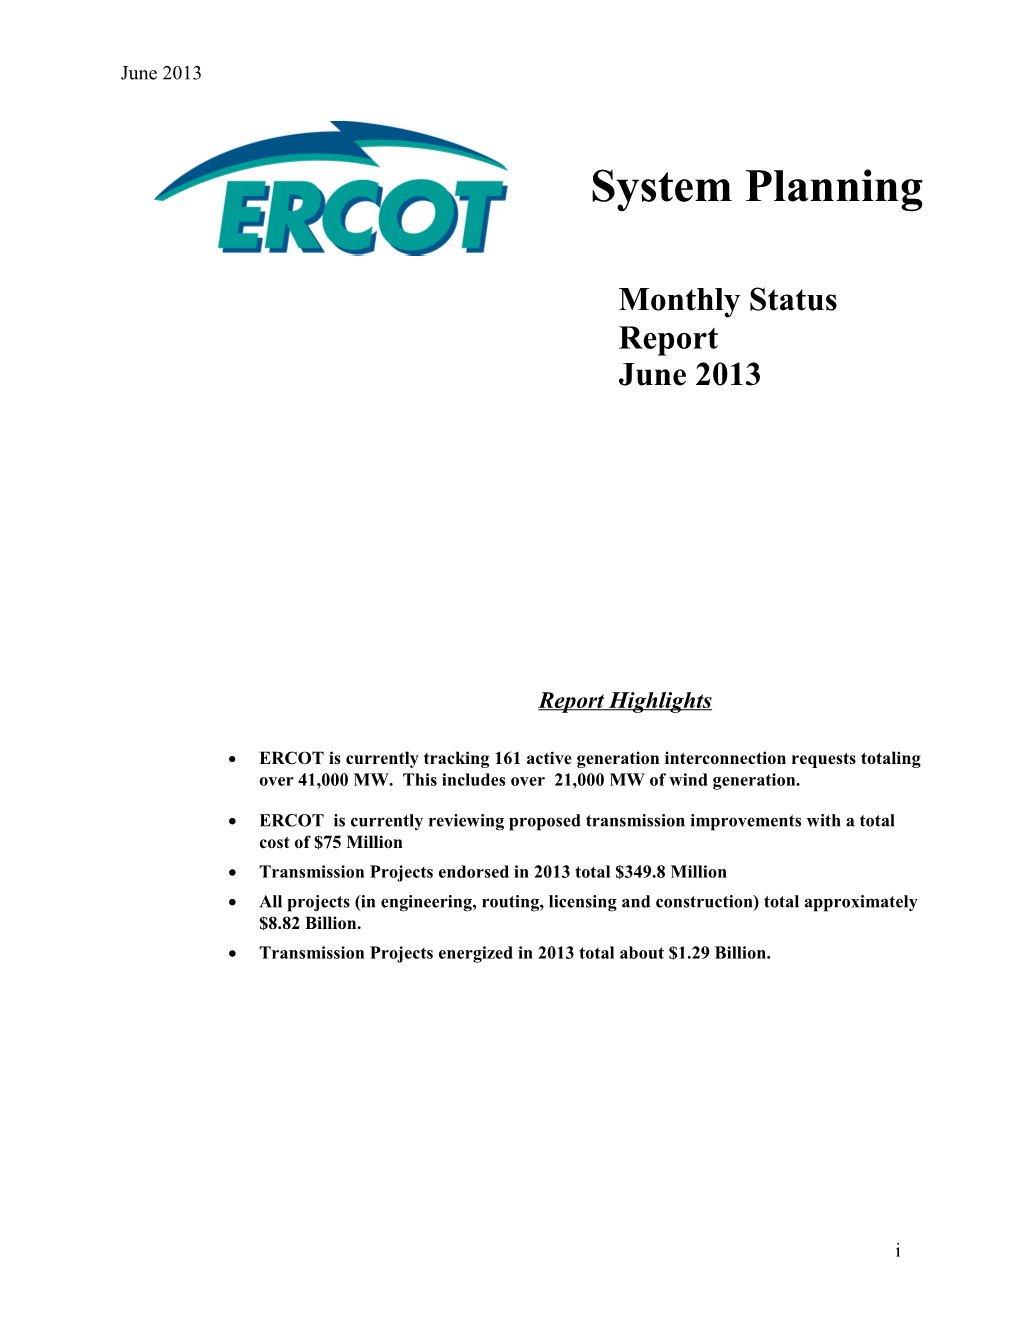 ERCOT Is Currently Reviewing Proposed Transmission Improvements with a Total Cost of $75